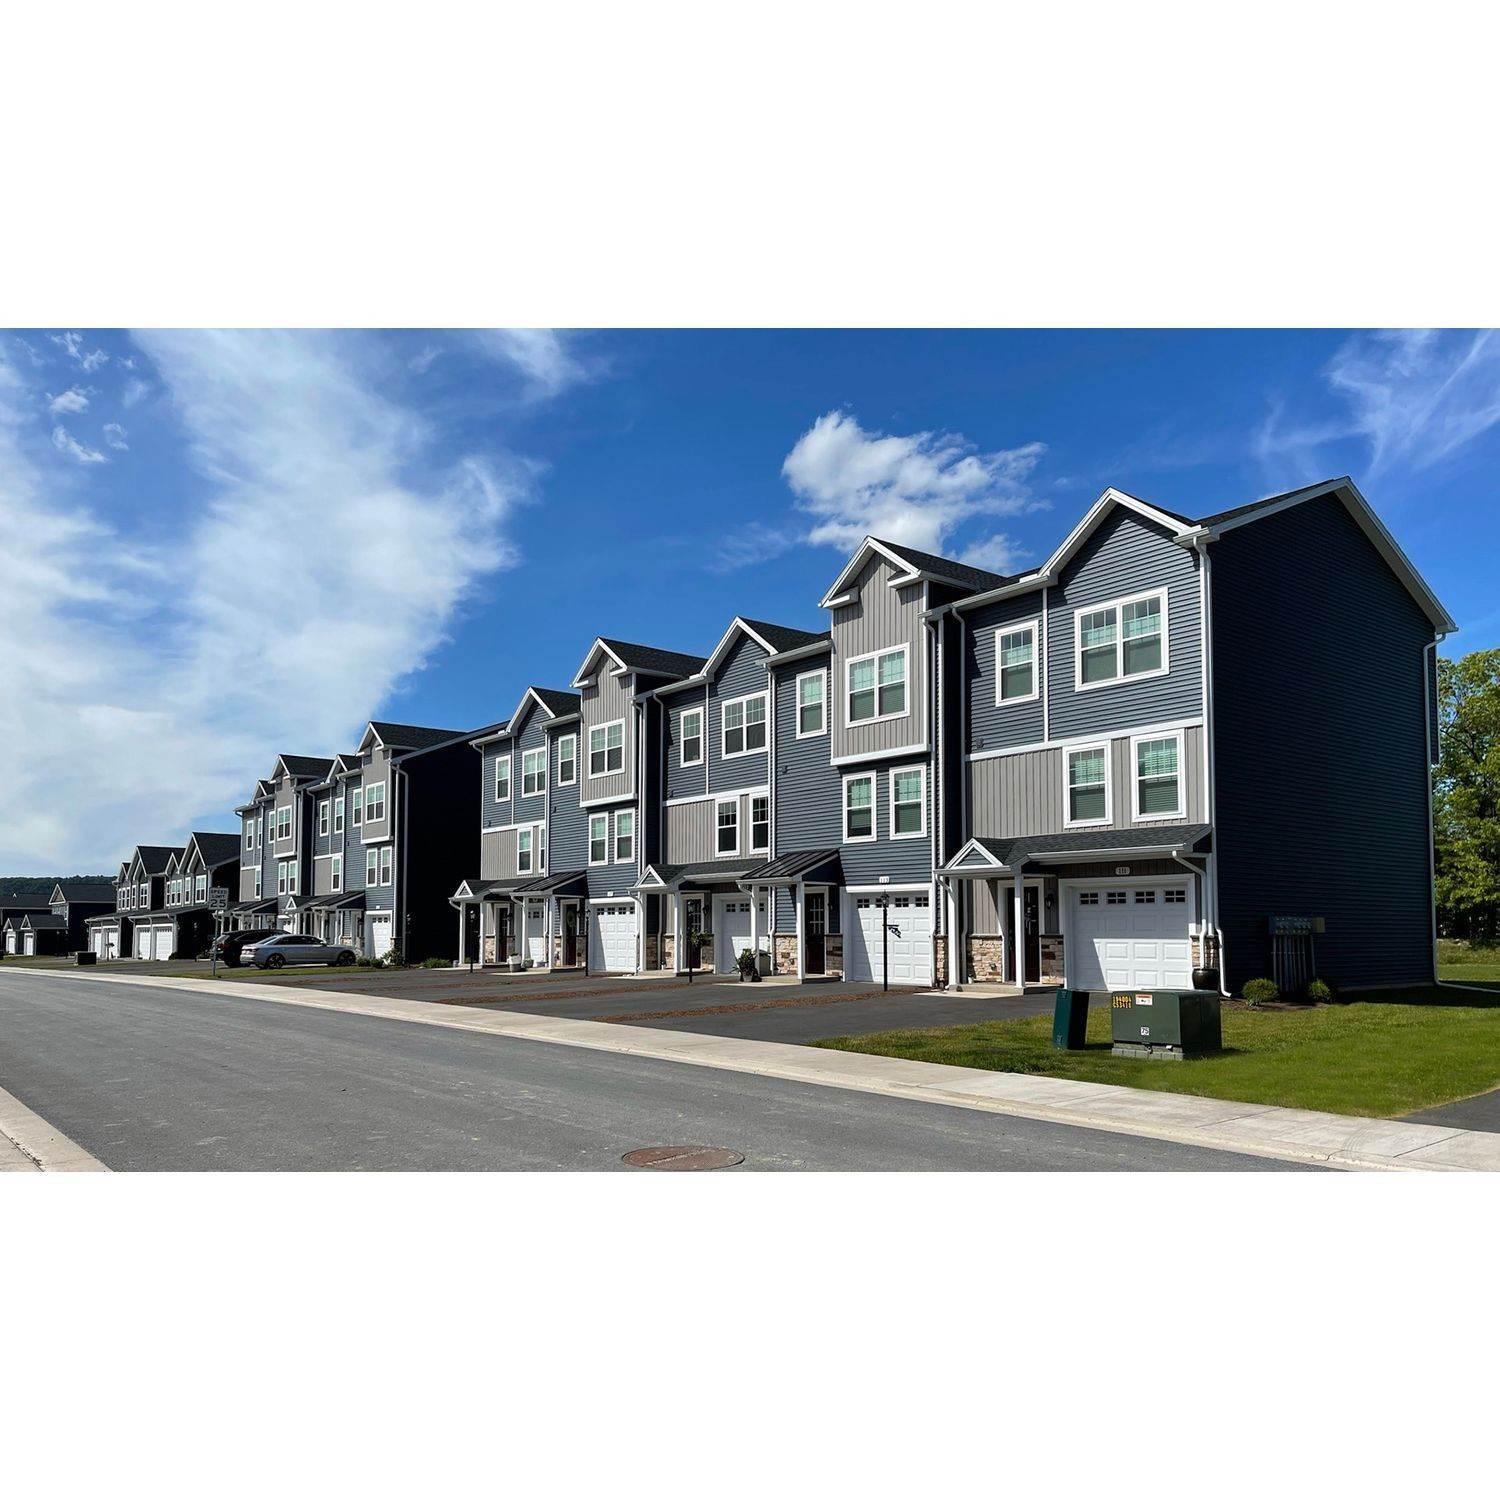 6. Grays Pointe - Townhomes building at 115 Amicus Drive, Port Matilda, PA 16870